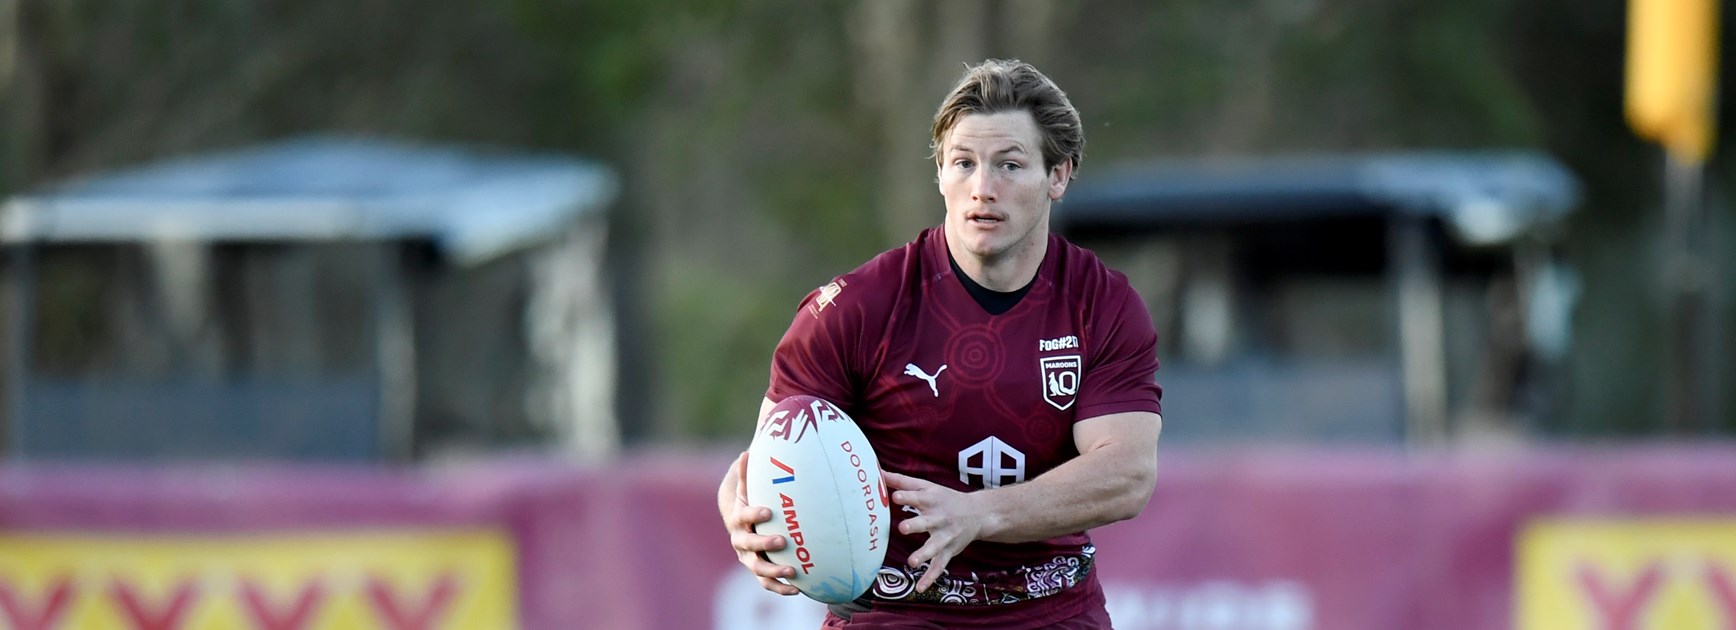 Grant living childhood dream in Maroons camp